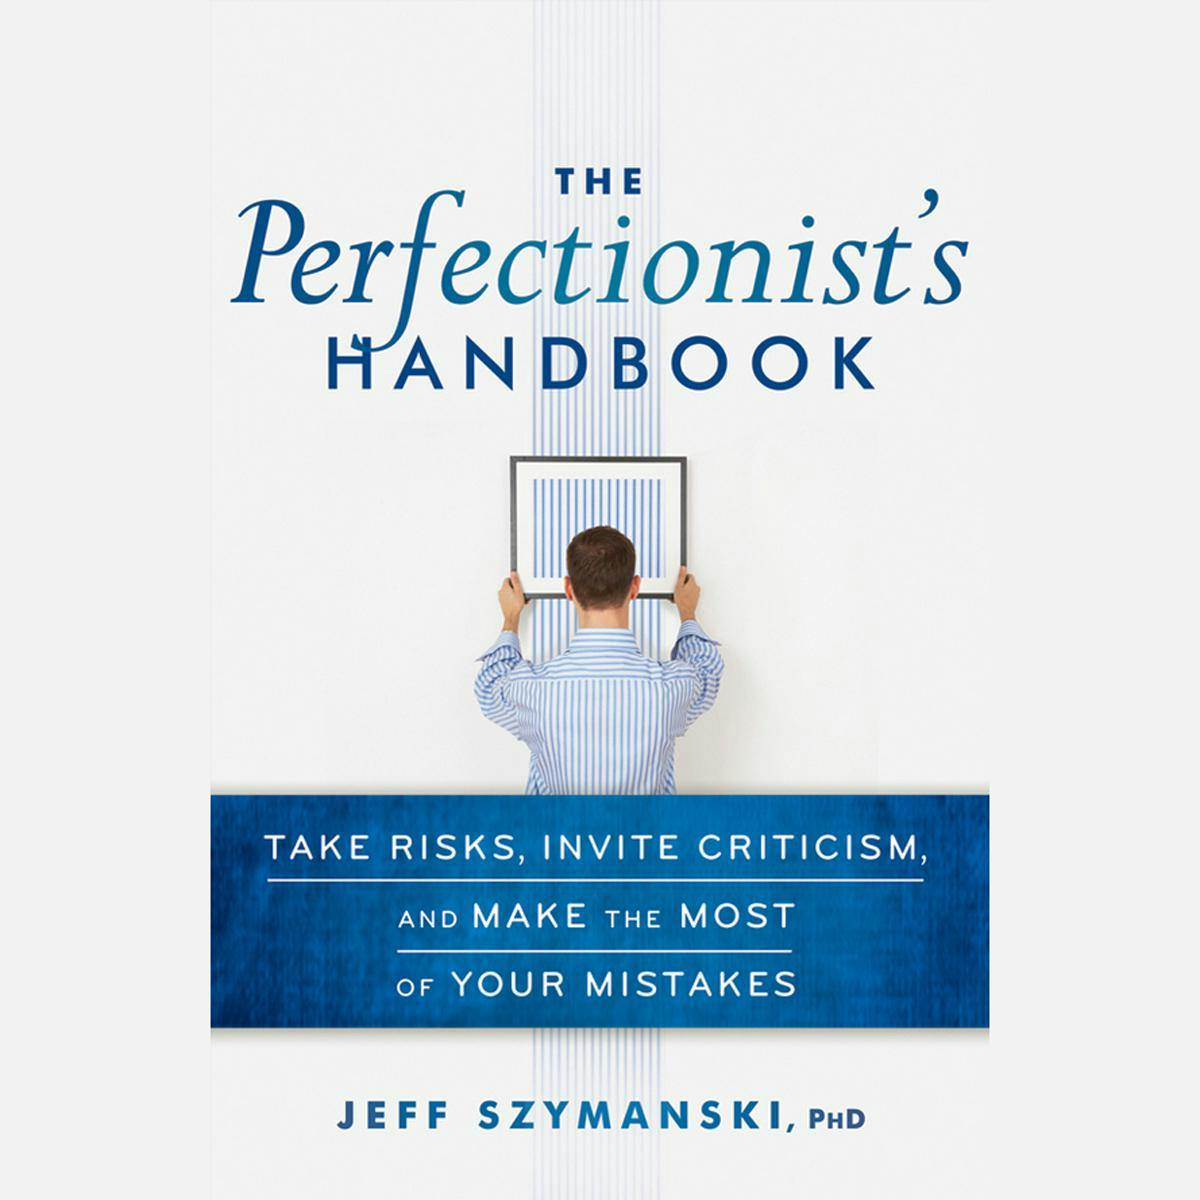 The Perfectionist's Handbook: Take Risks, Invite Criticism, and Make the Most of Your Mistakes - Jeff Szymanski